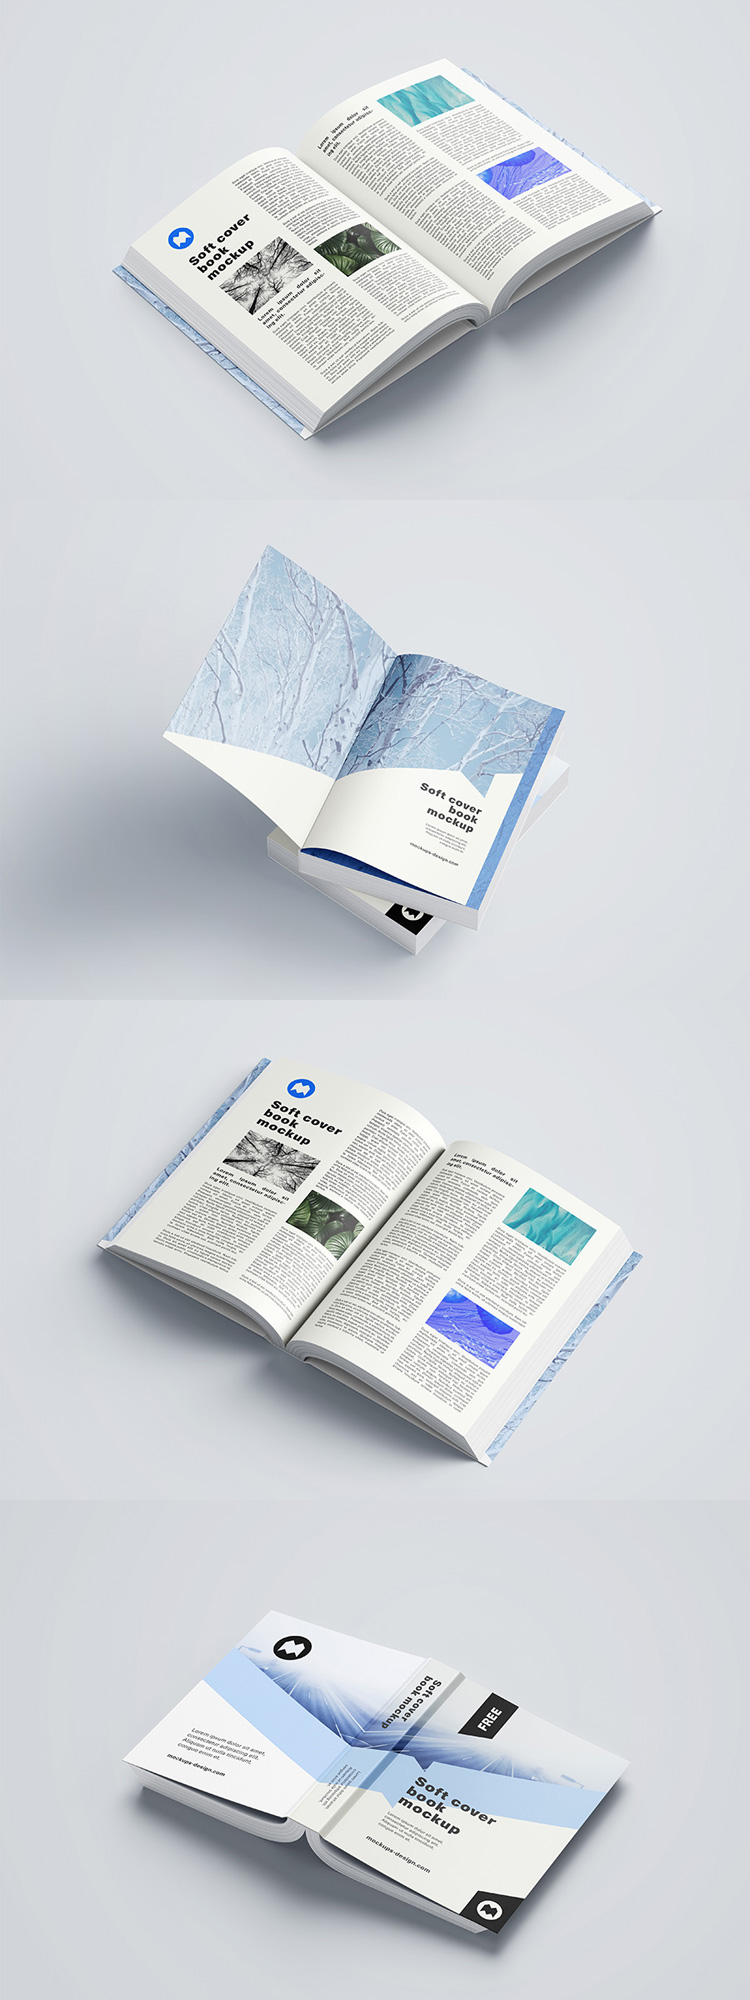 Download Free Softcover Book Mockup Find The Perfect Creative Mockups Freebies To Showcase Your Project To Life Yellowimages Mockups